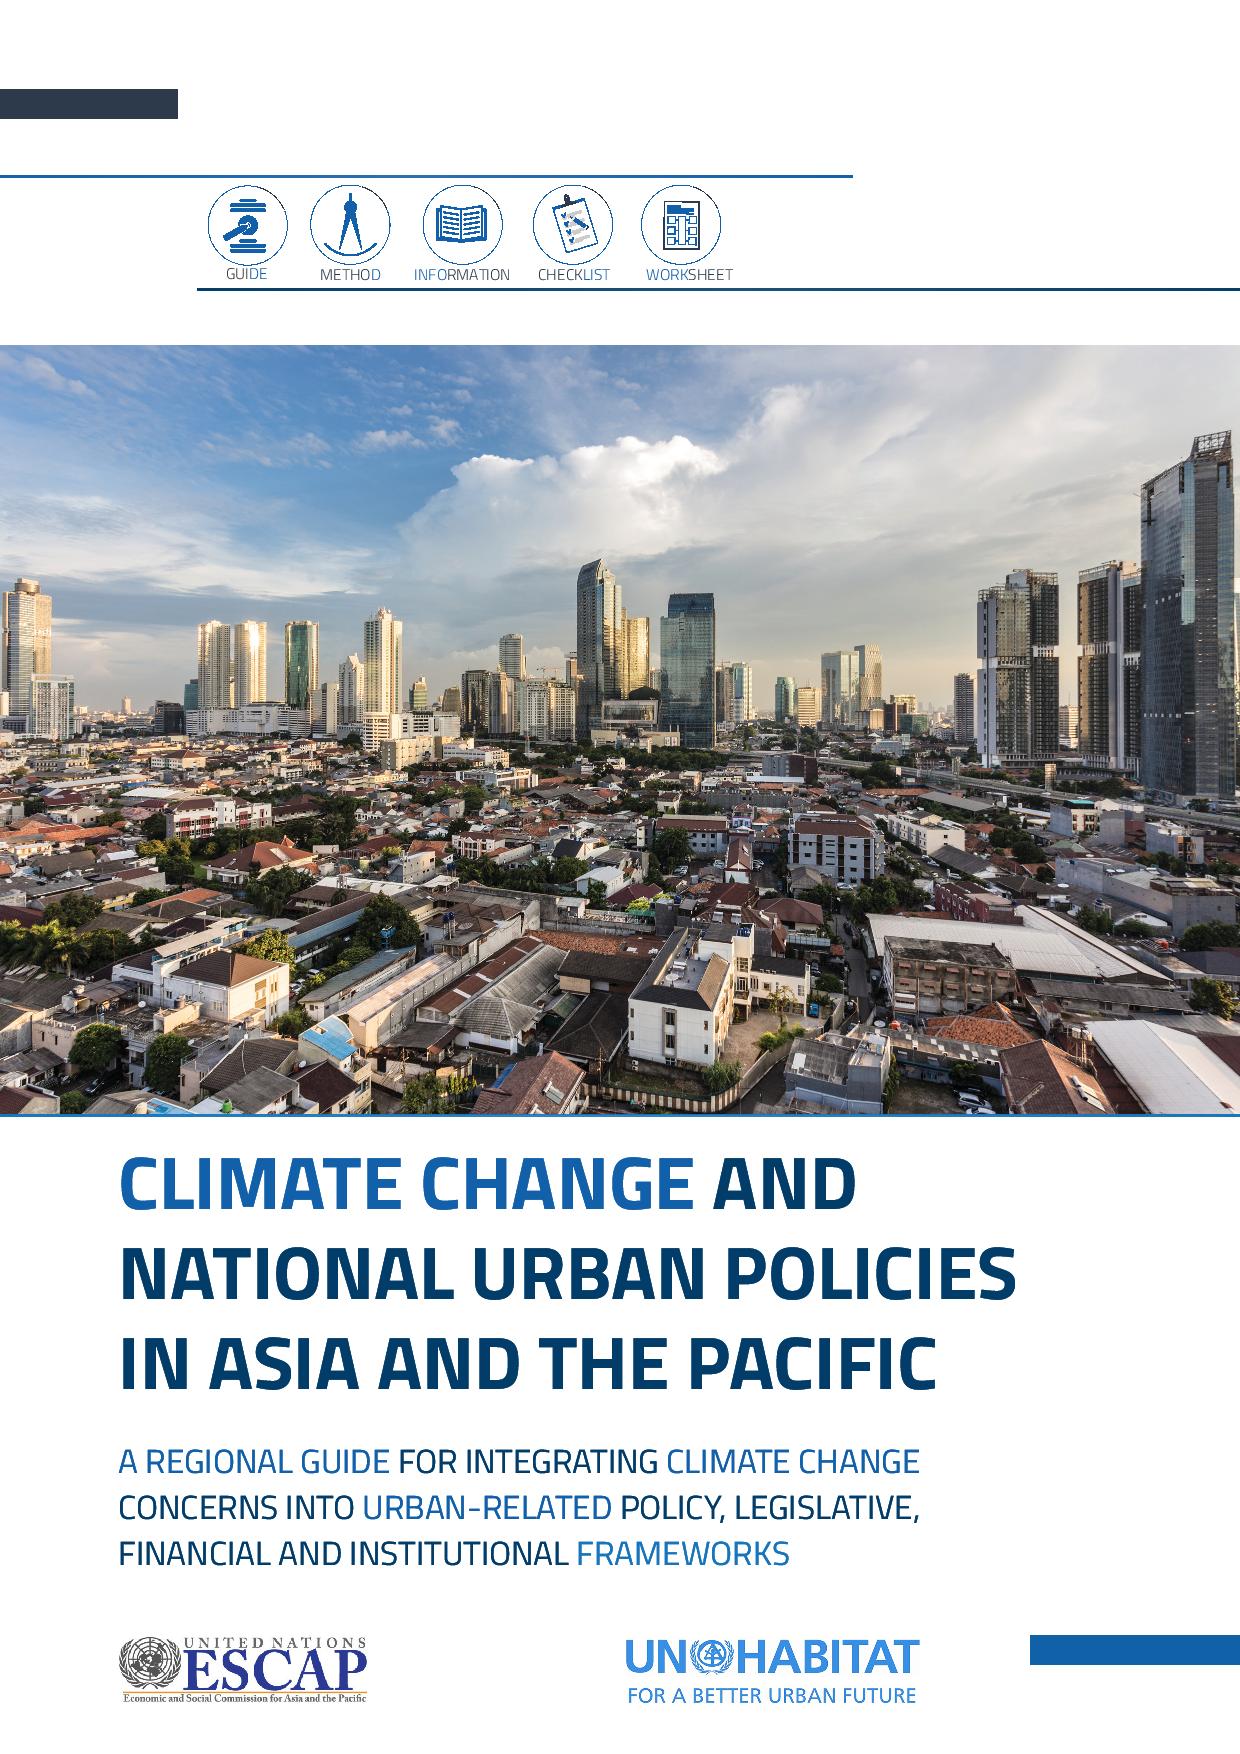 Climate Change and National Urban Policies in Asia and the Pacific – A regional guide for mainstreaming climate change into urban related urban-related policy, legislative, financial and institutional frameworks